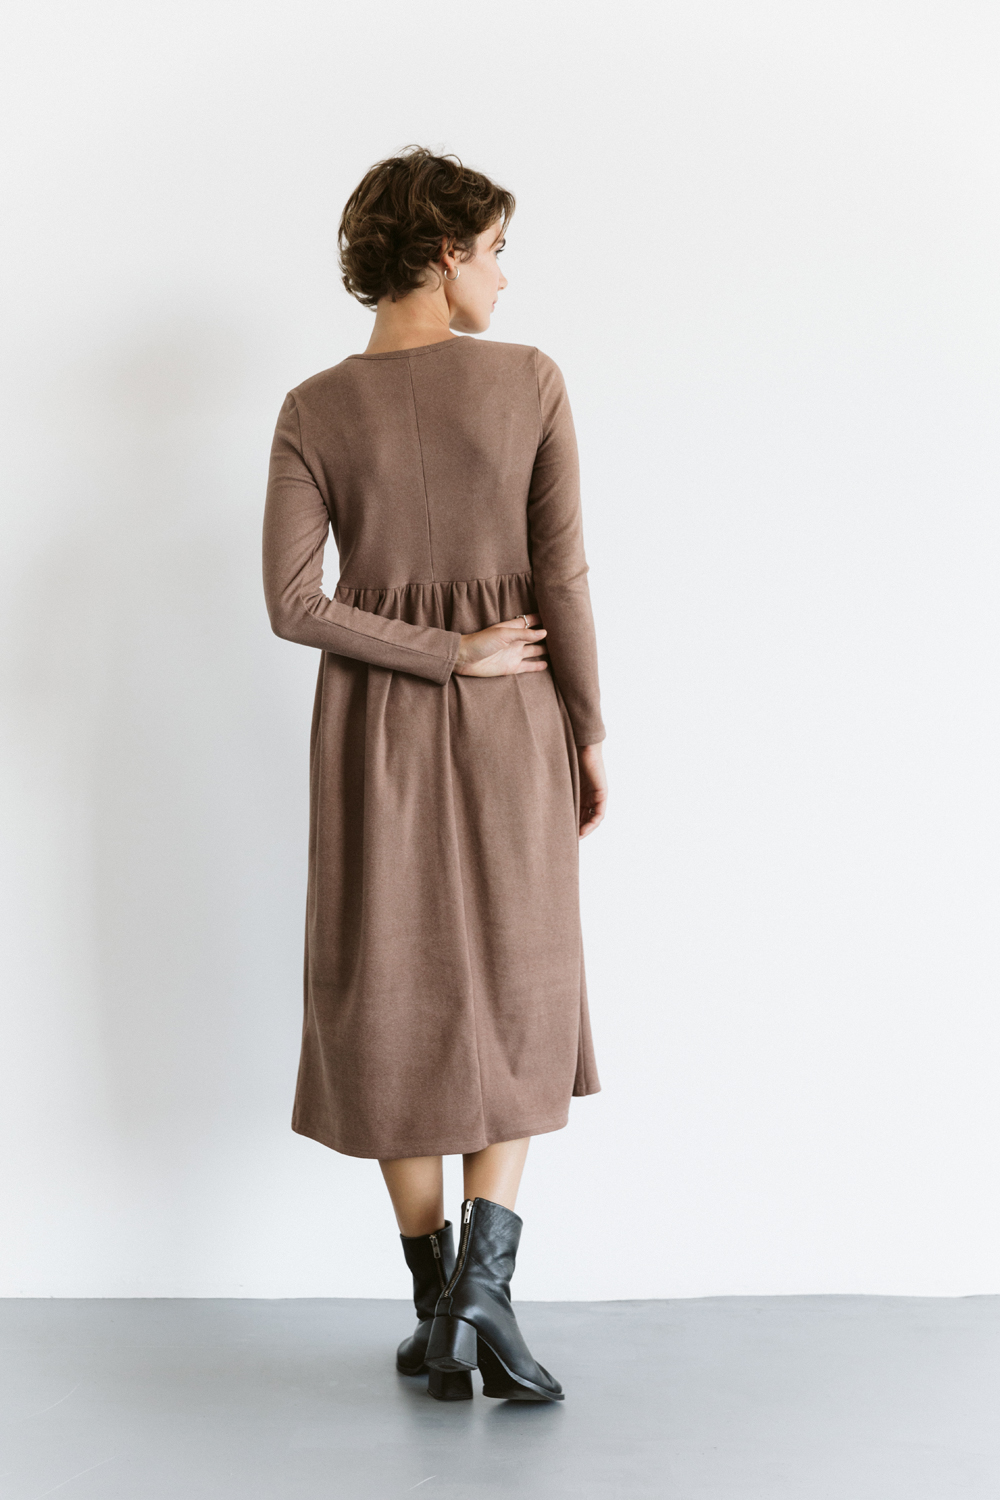 High-waisted dress in Mocha color